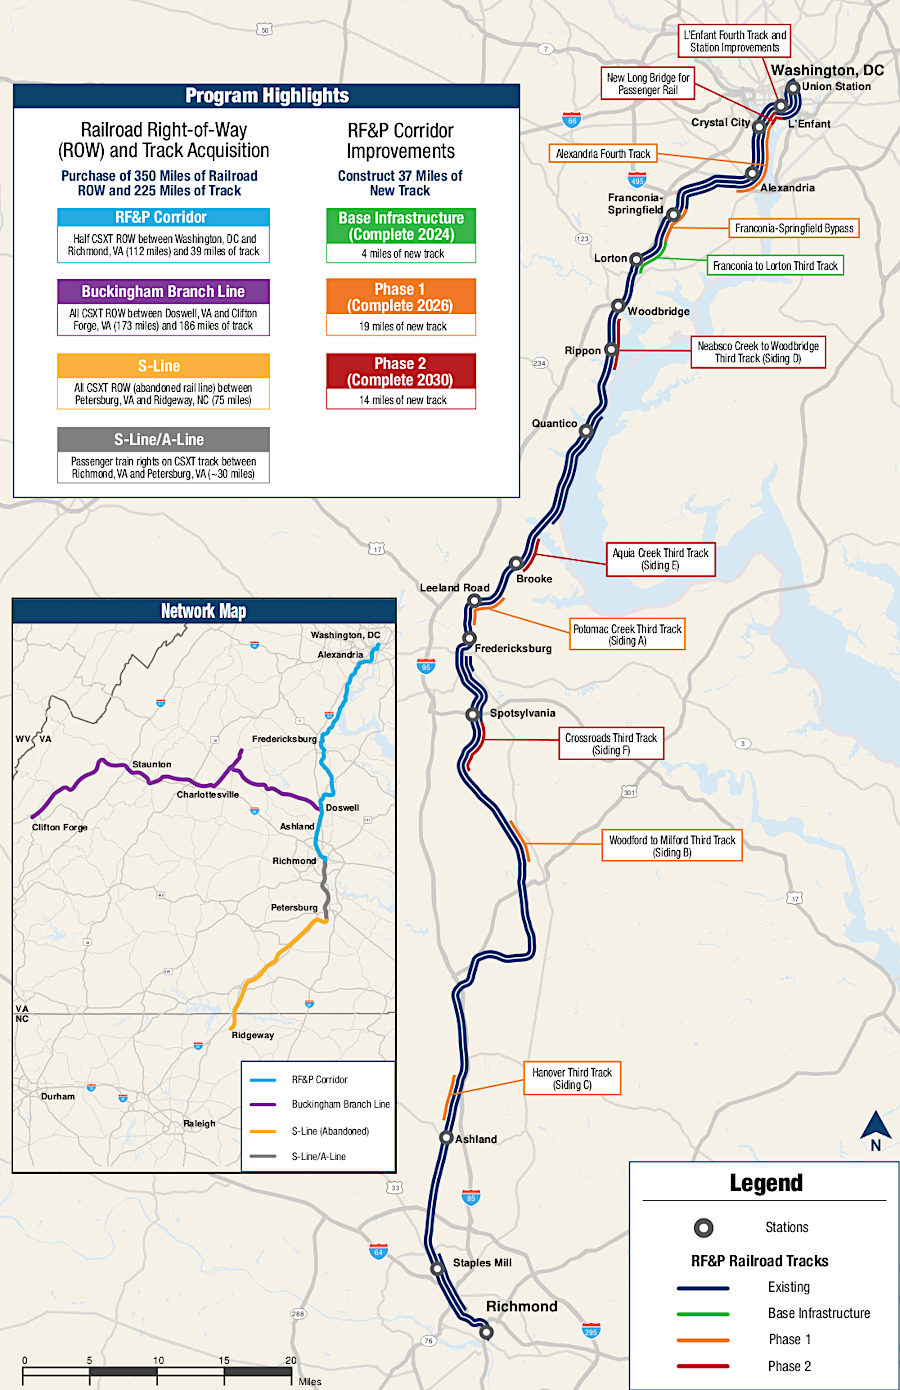 in 2019, Governor Northam announced a $3.7 billion plan to acquire track and expand passenger rail